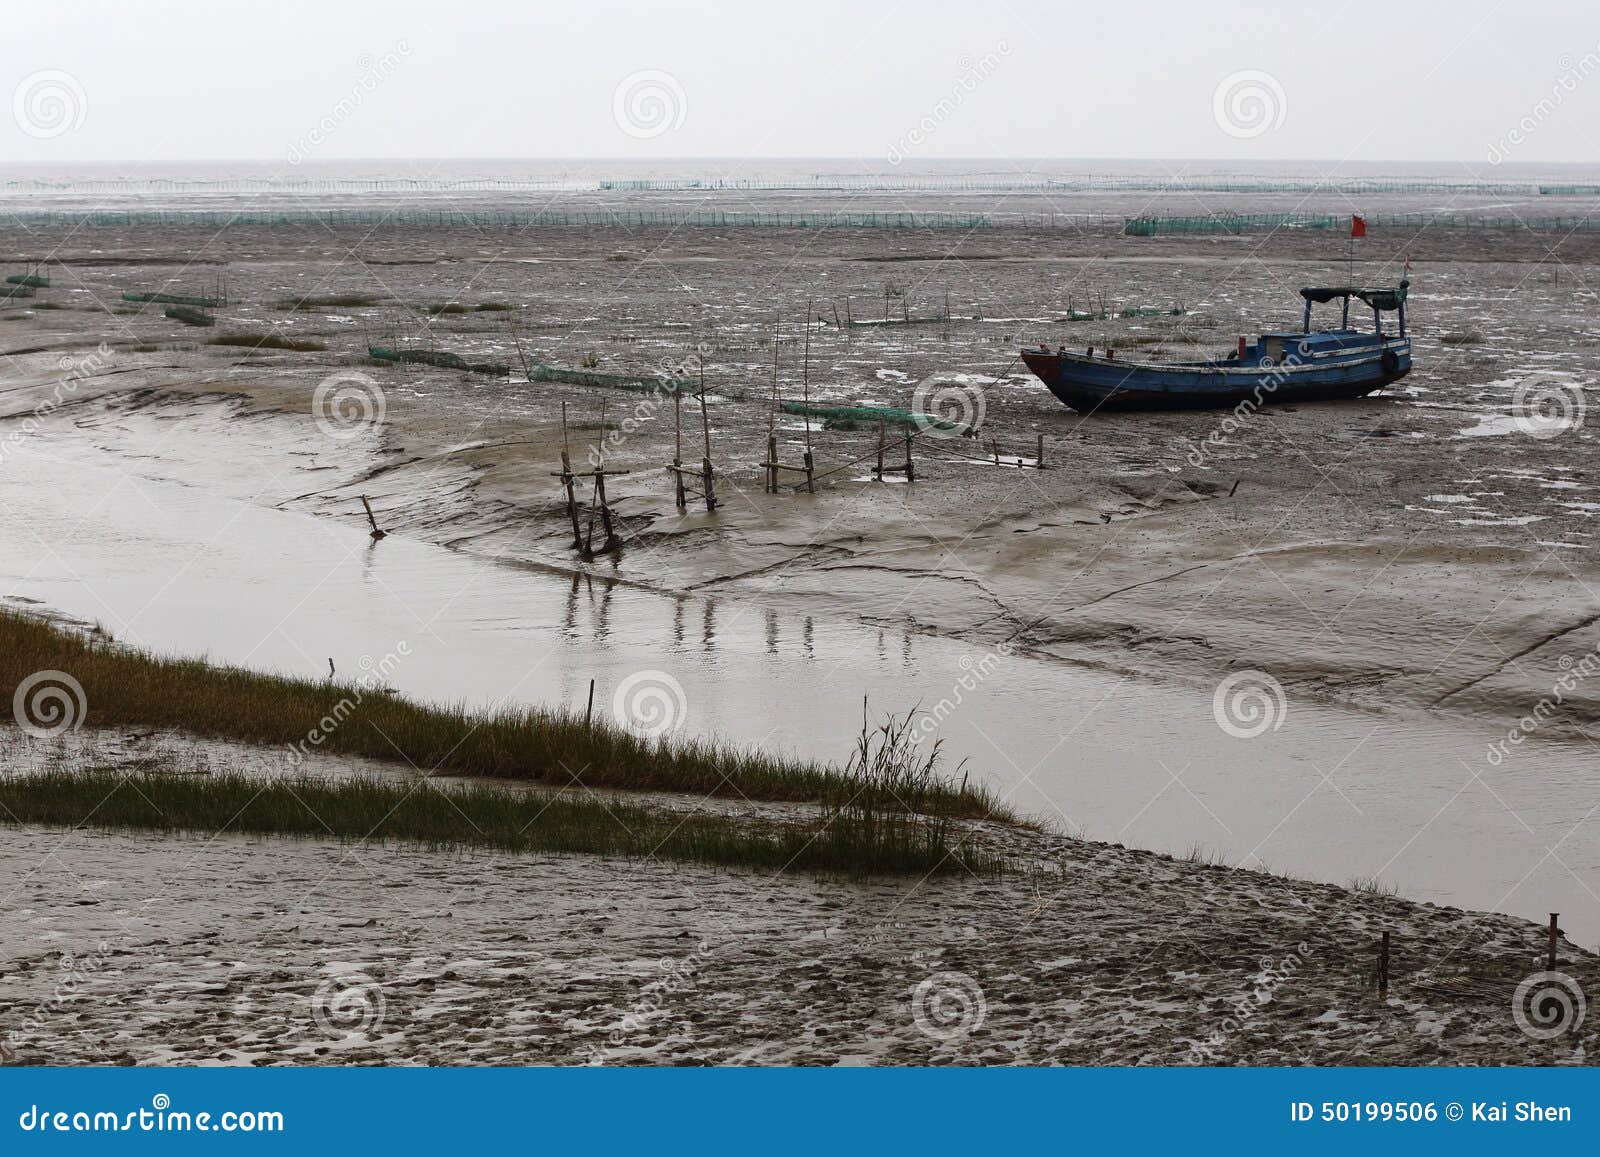 after the ebb, the boat ran aground on the tidal flat river of mud,